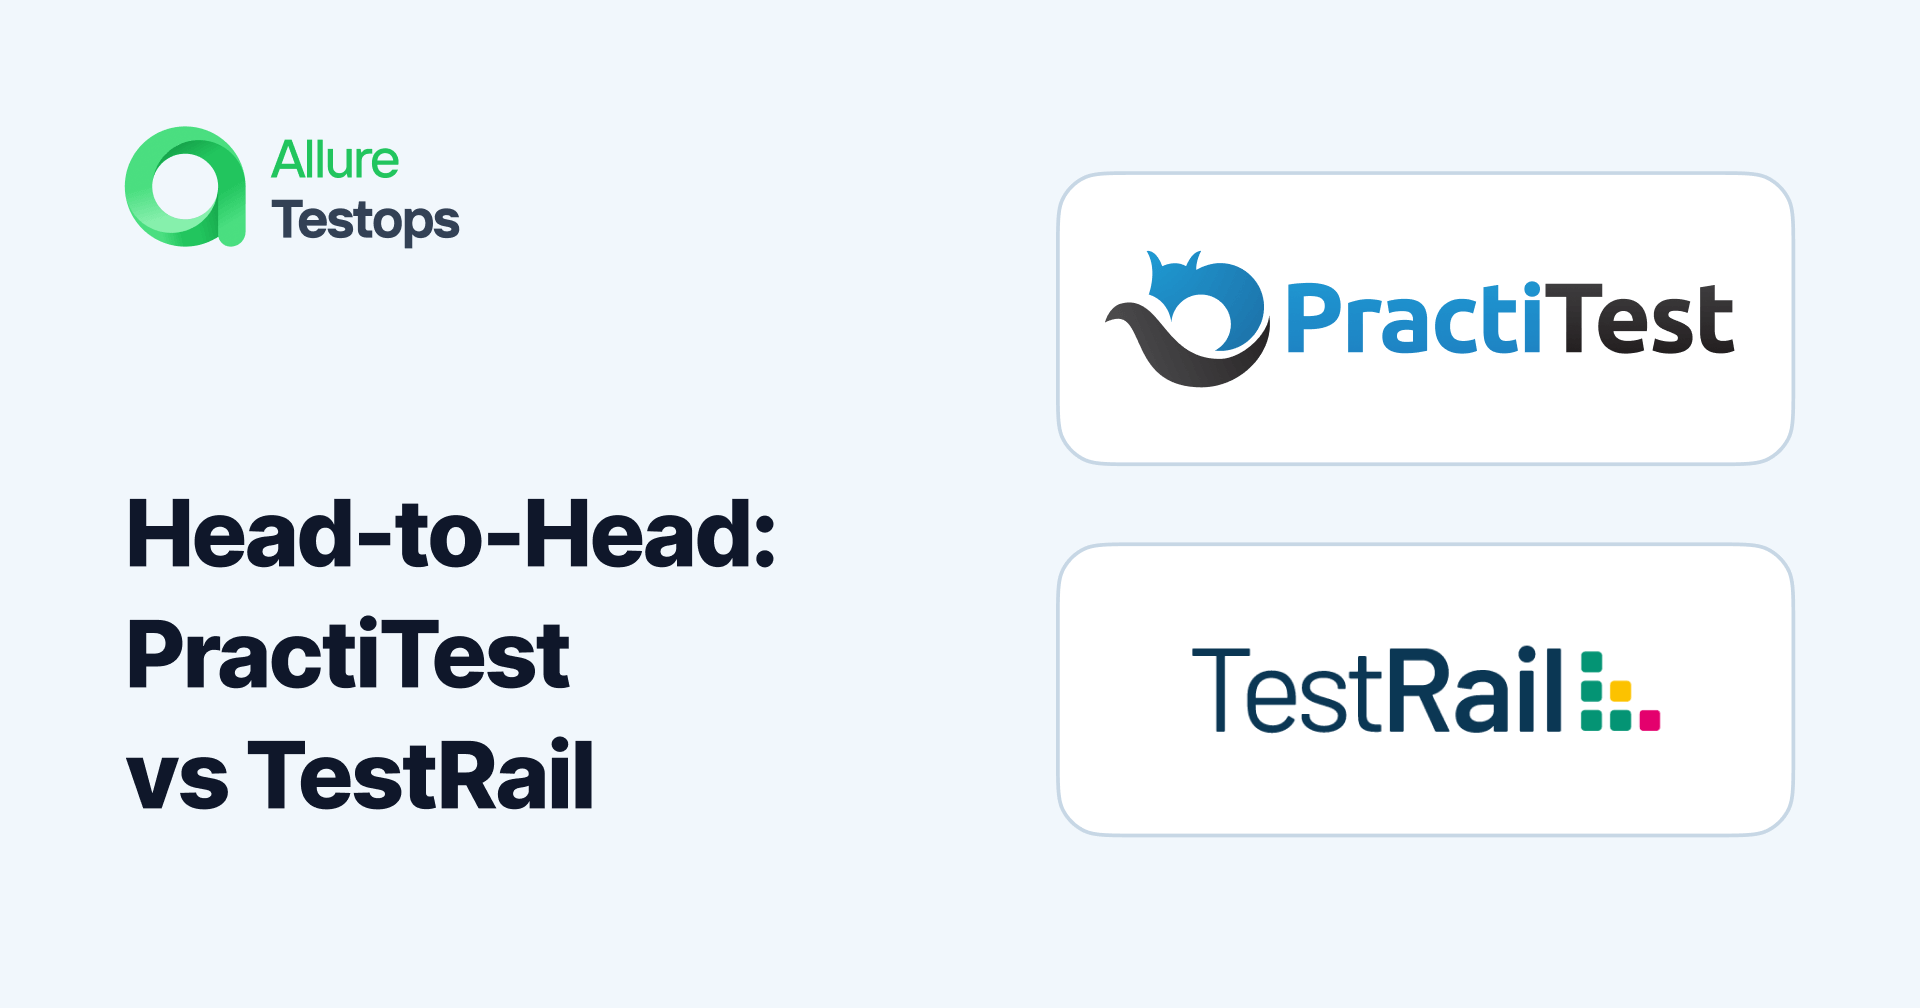 Head-to-Head: PractiTest vs TestRail - Comparing the Top Test Management Solutions